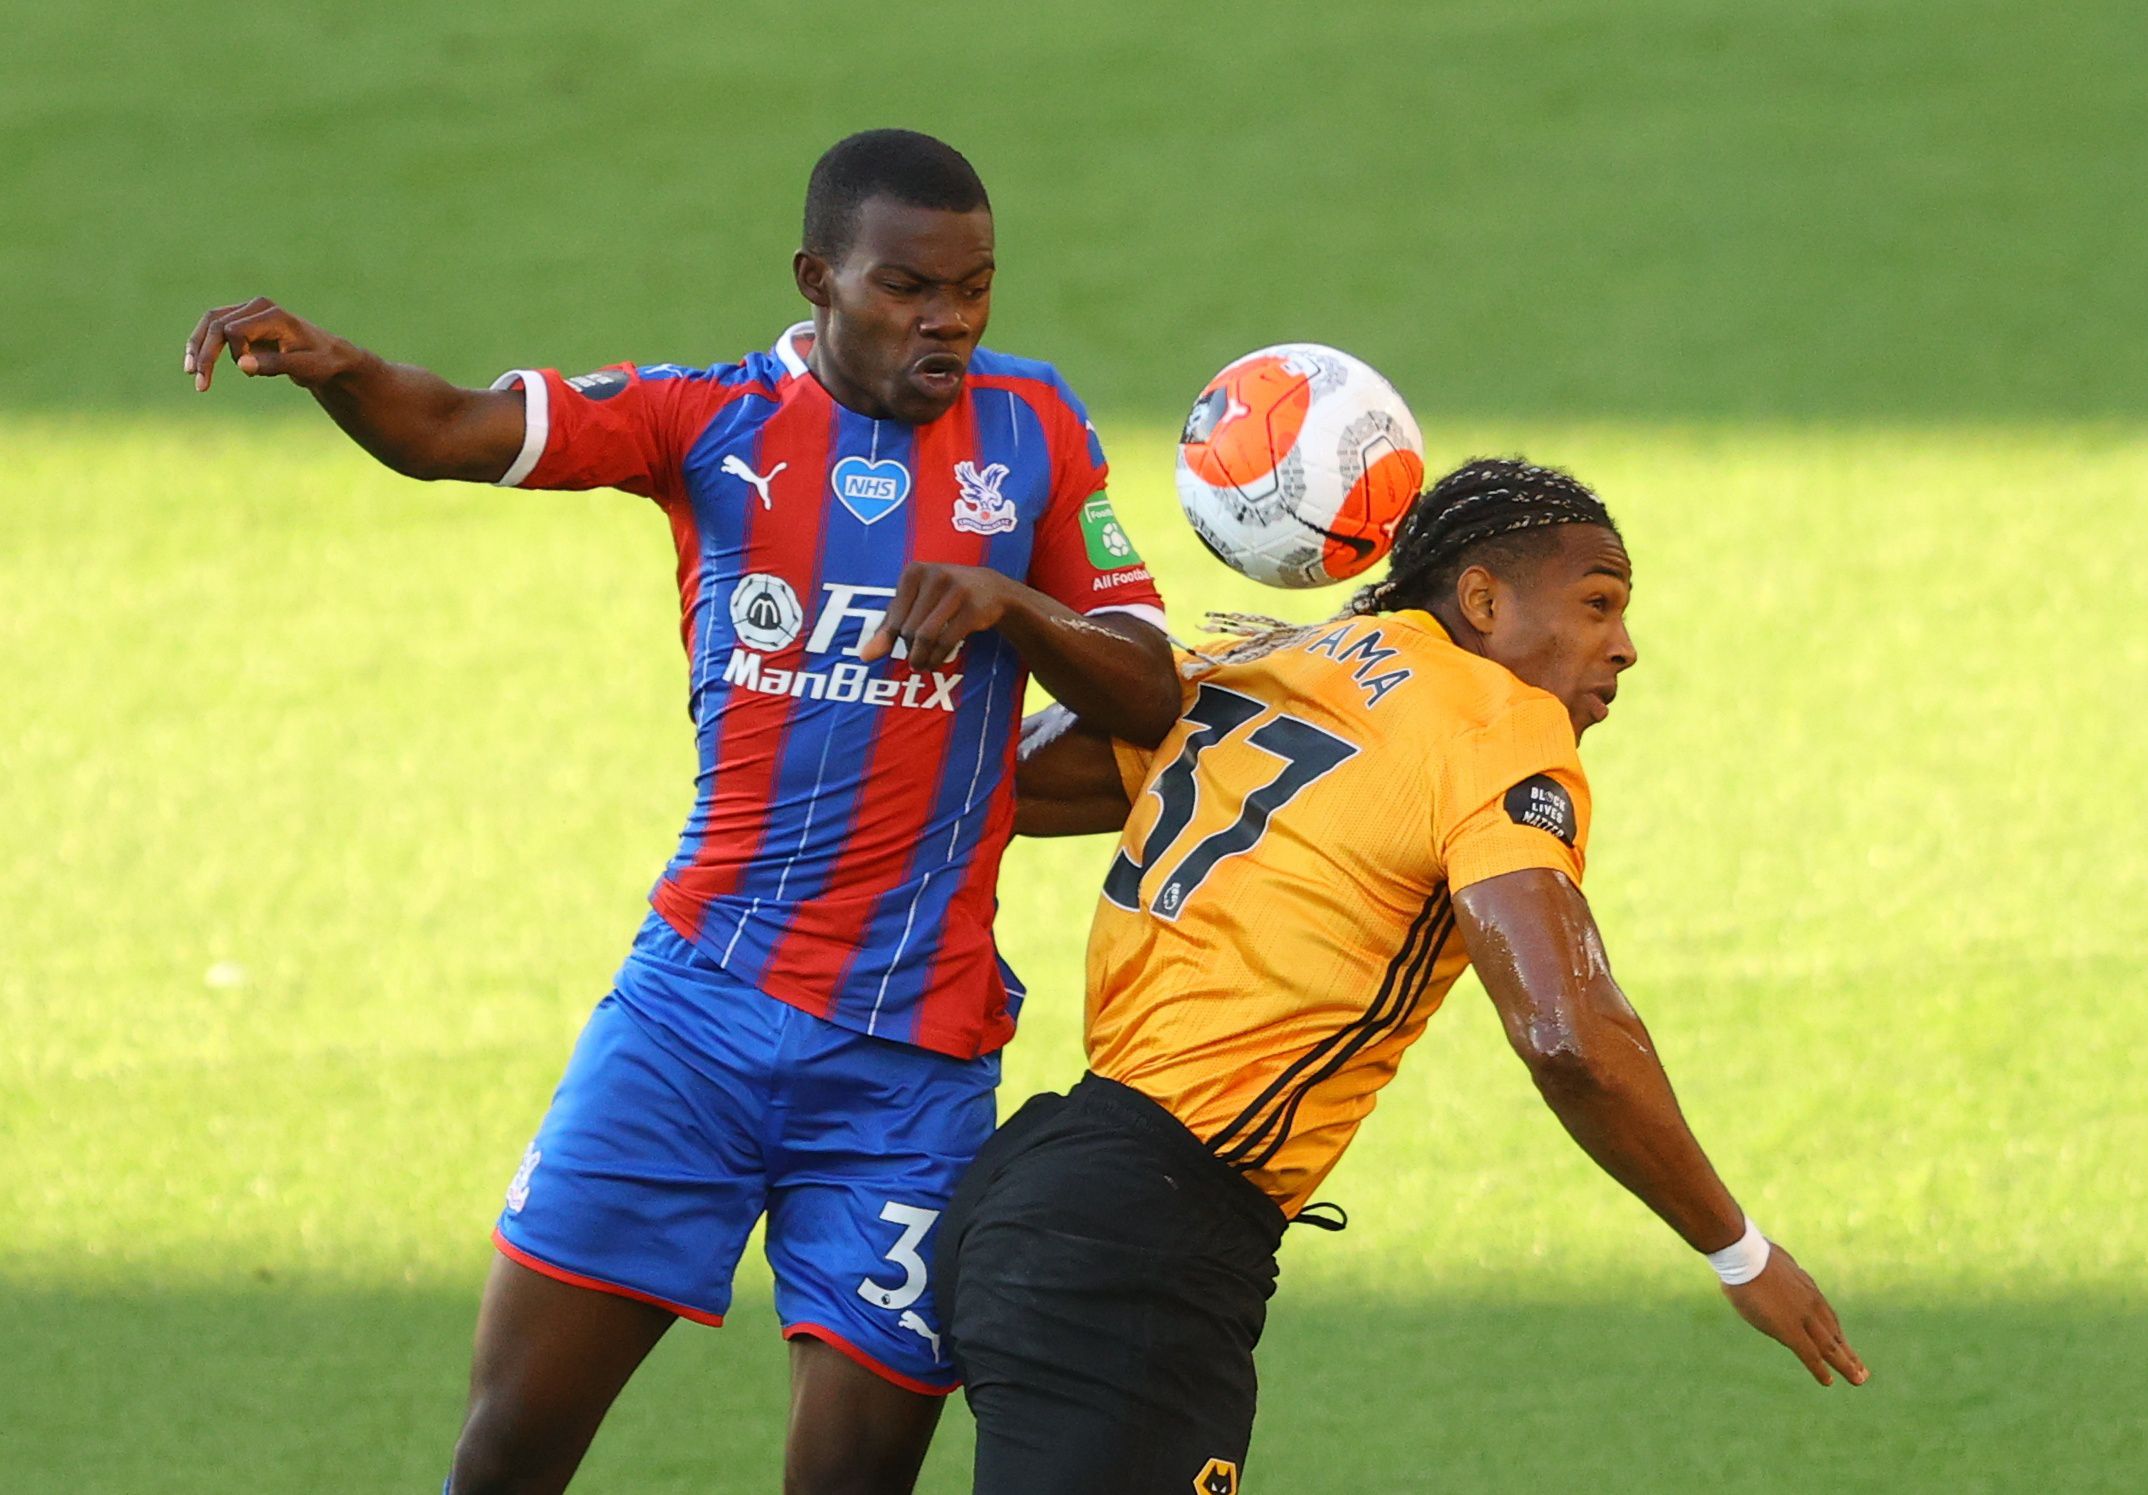 Soccer Football - Premier League - Wolverhampton Wanderers v Crystal Palace - Molineux Stadium, Wolverhampton, Britain - July 20, 2020 Crystal Palace's Tyrick Mitchell in action with Wolverhampton Wanderers' Adama Traore, as play resumes behind closed doors following the outbreak of the coronavirus disease (COVID-19) Pool via REUTERS/Richard Heathcote EDITORIAL USE ONLY. No use with unauthorized audio, video, data, fixture lists, club/league logos or 'live' services. Online in-match use limited 